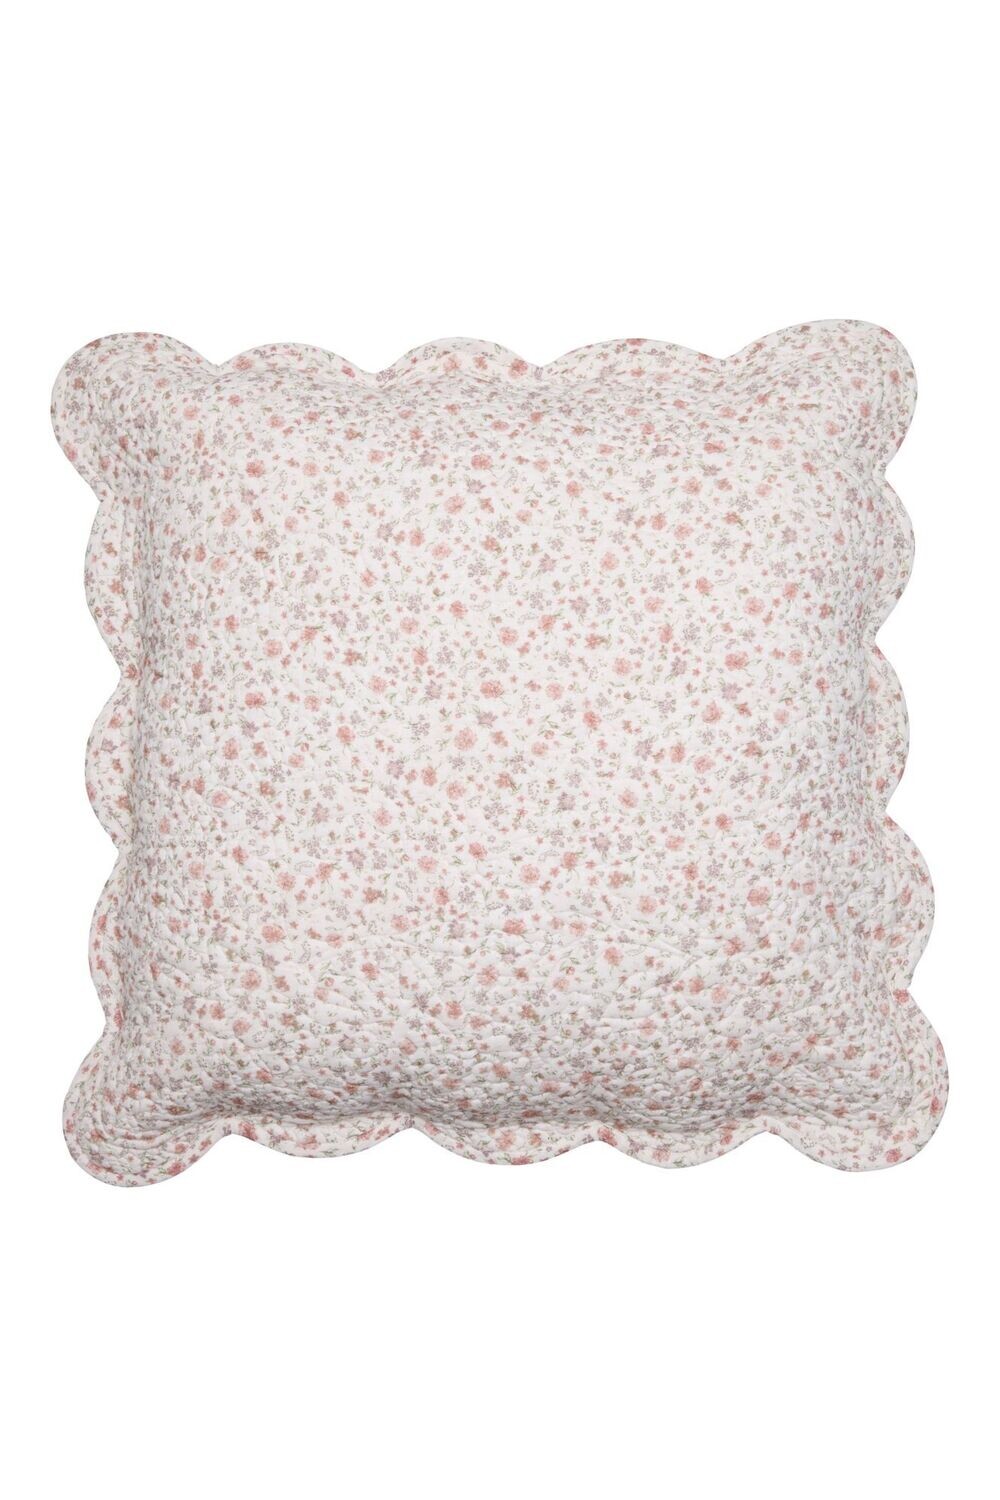 Femme Facon Rosy Blossom Quilted Cushion Square